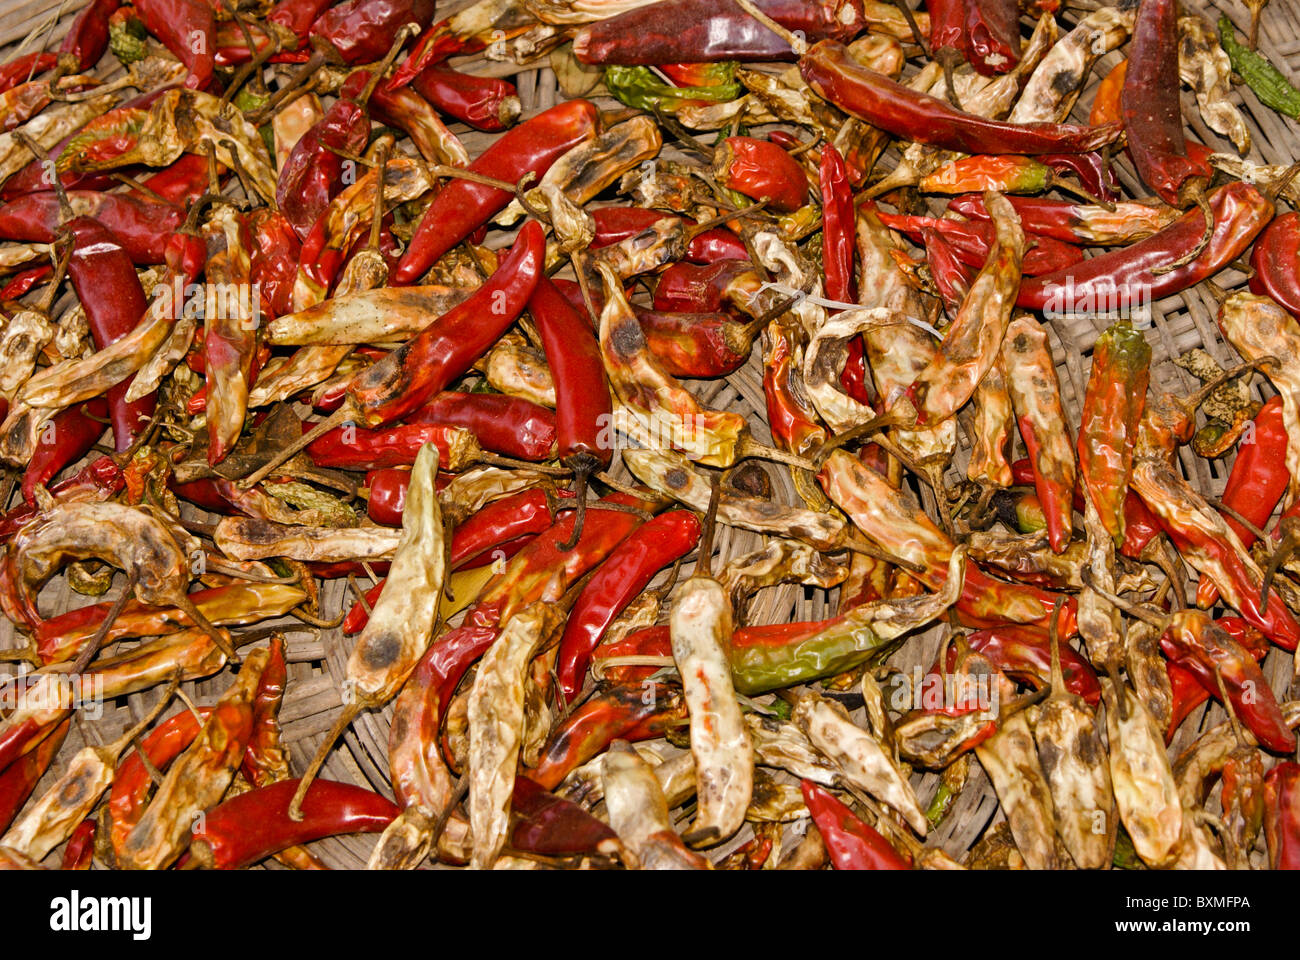 Drying chili peppers, South Korea Stock Photo